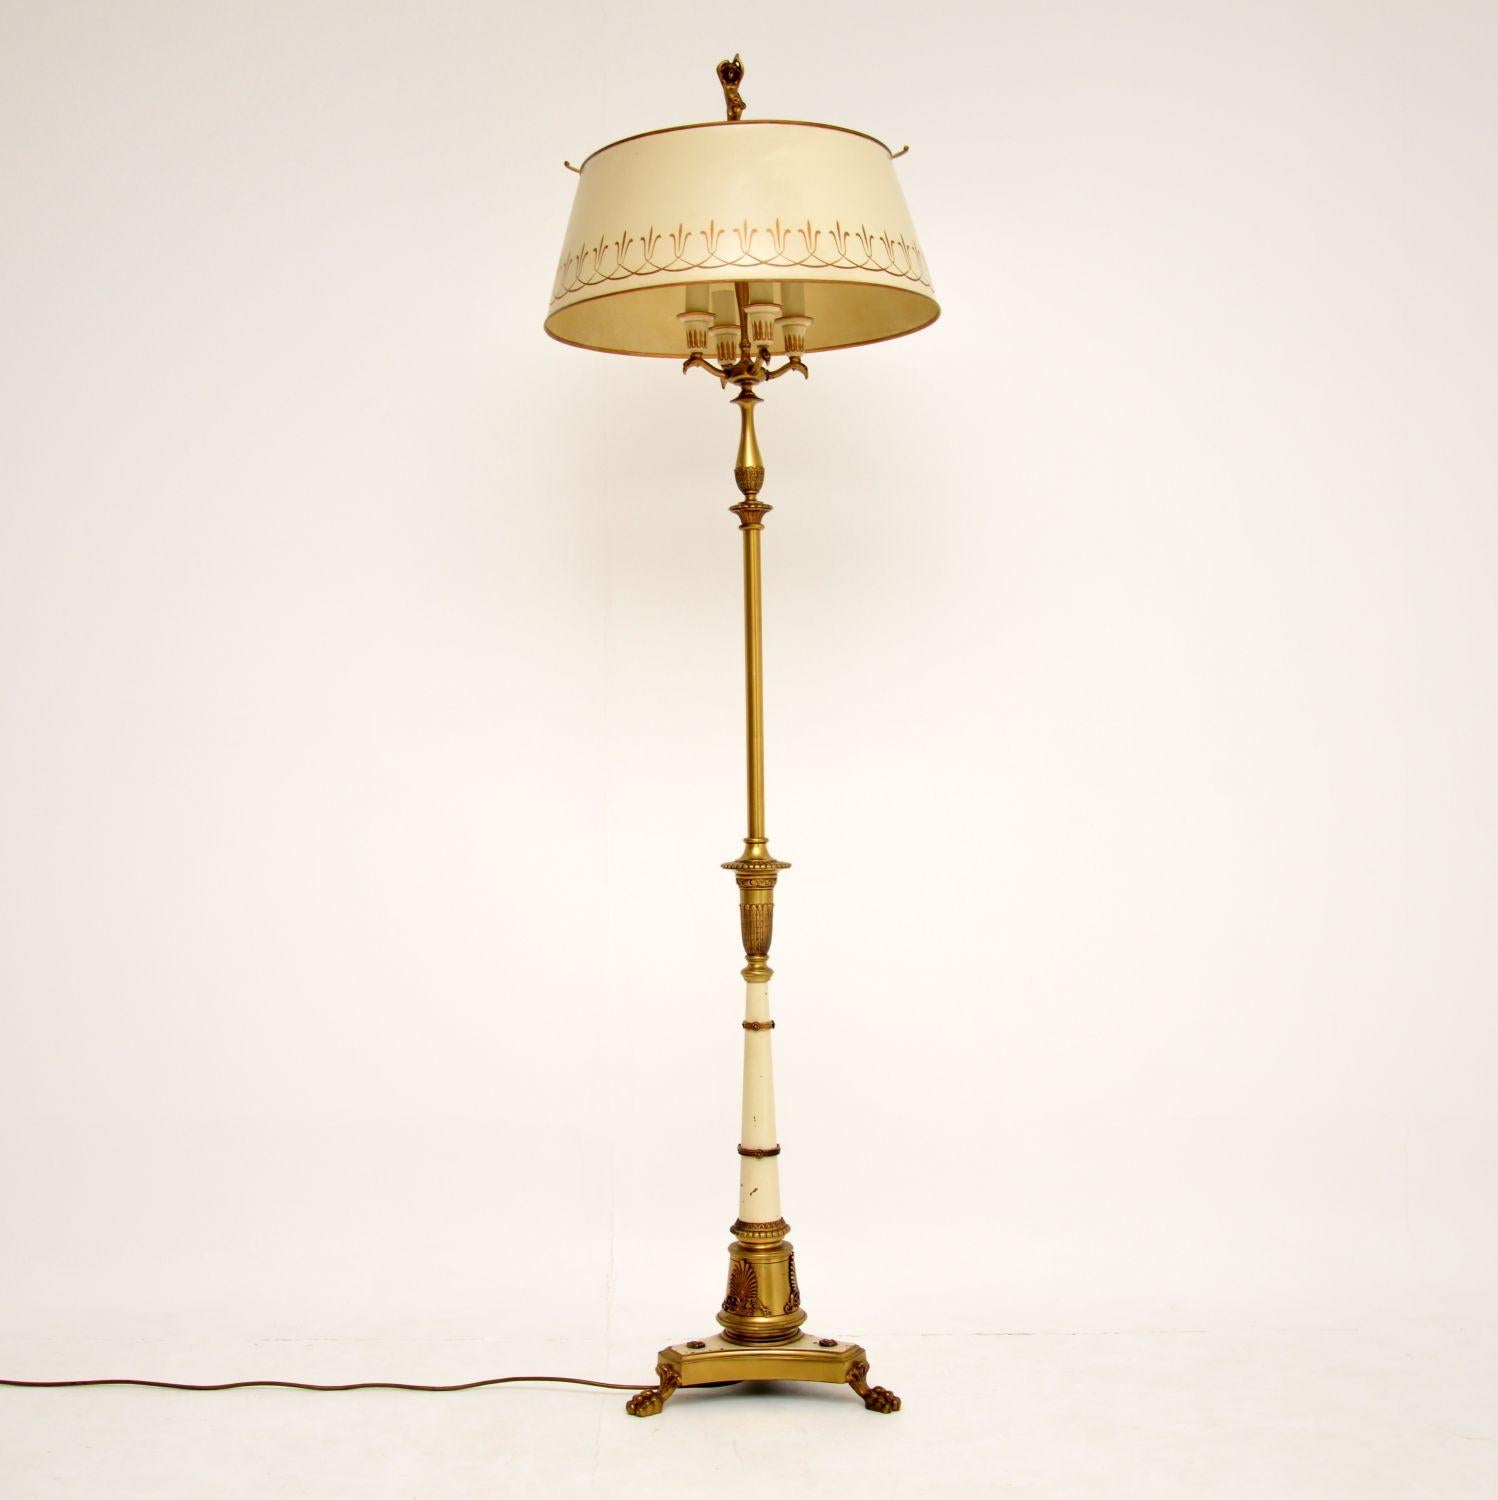 Antique early tole floor lamp stand & original matching shade in an ivory colour, dating from around the 1900-1920 period, all in good original condition with some natural age related marks on the base.

Please enlarge all the images to see all